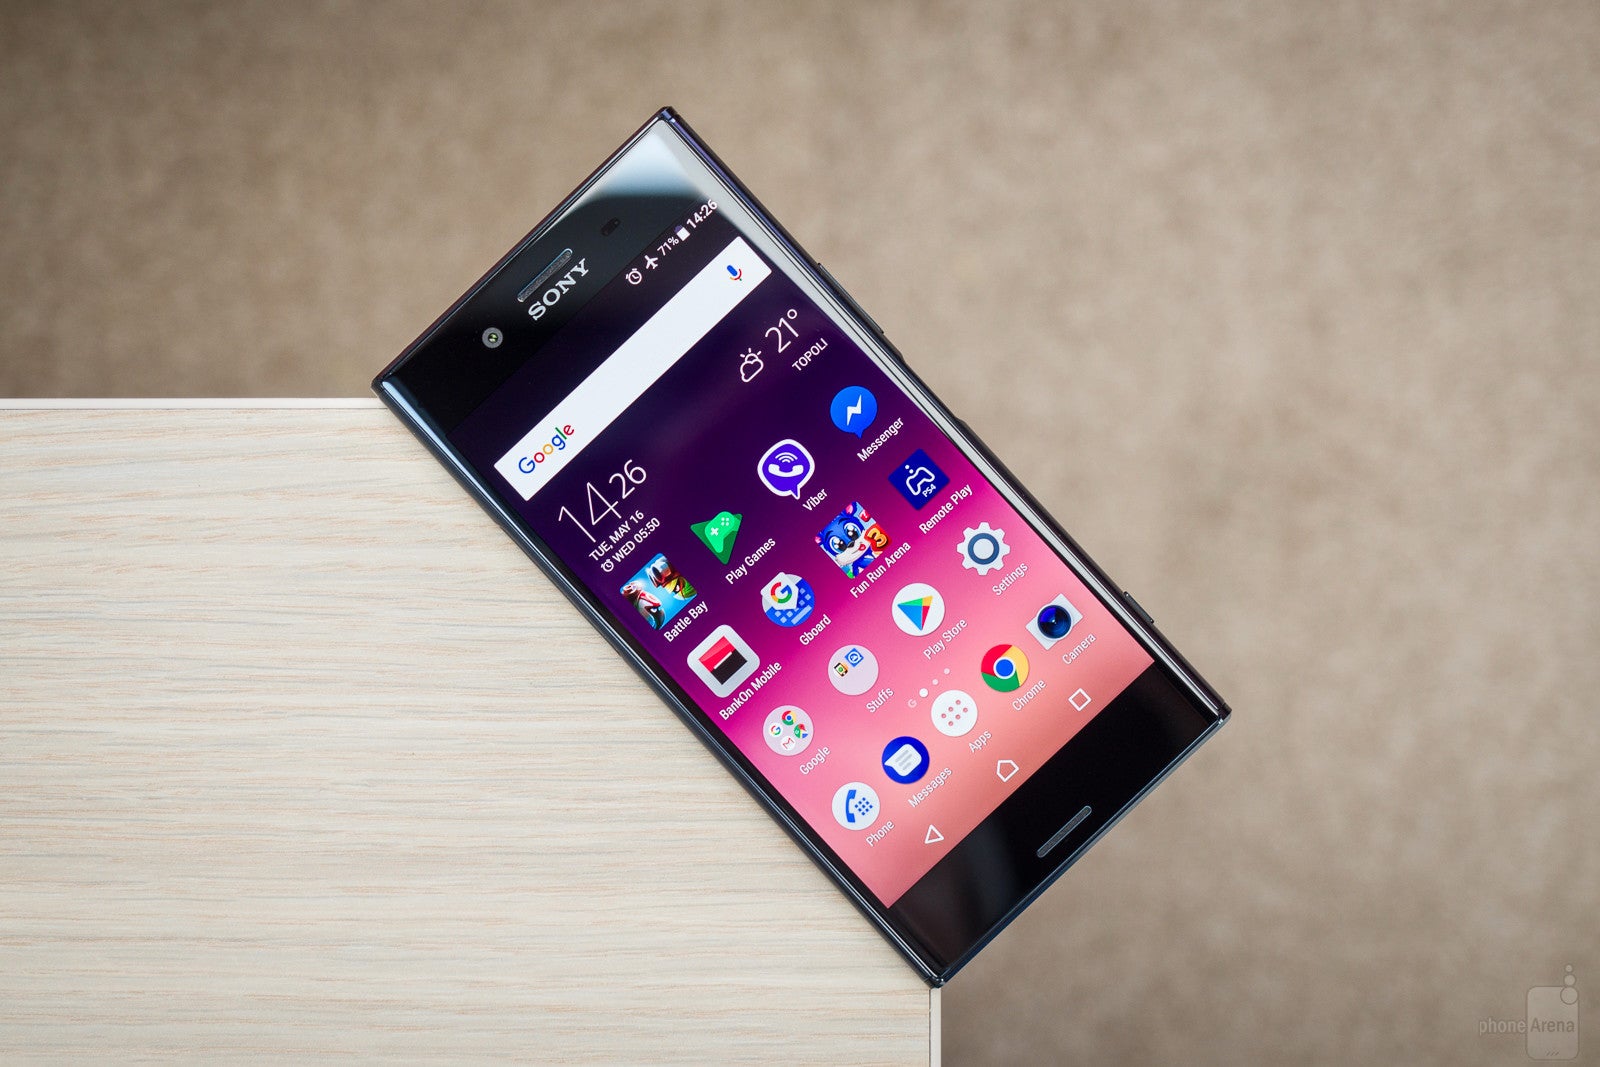 Sony Xperia XZ Pro rumor review: Design, specs, features, price and release date